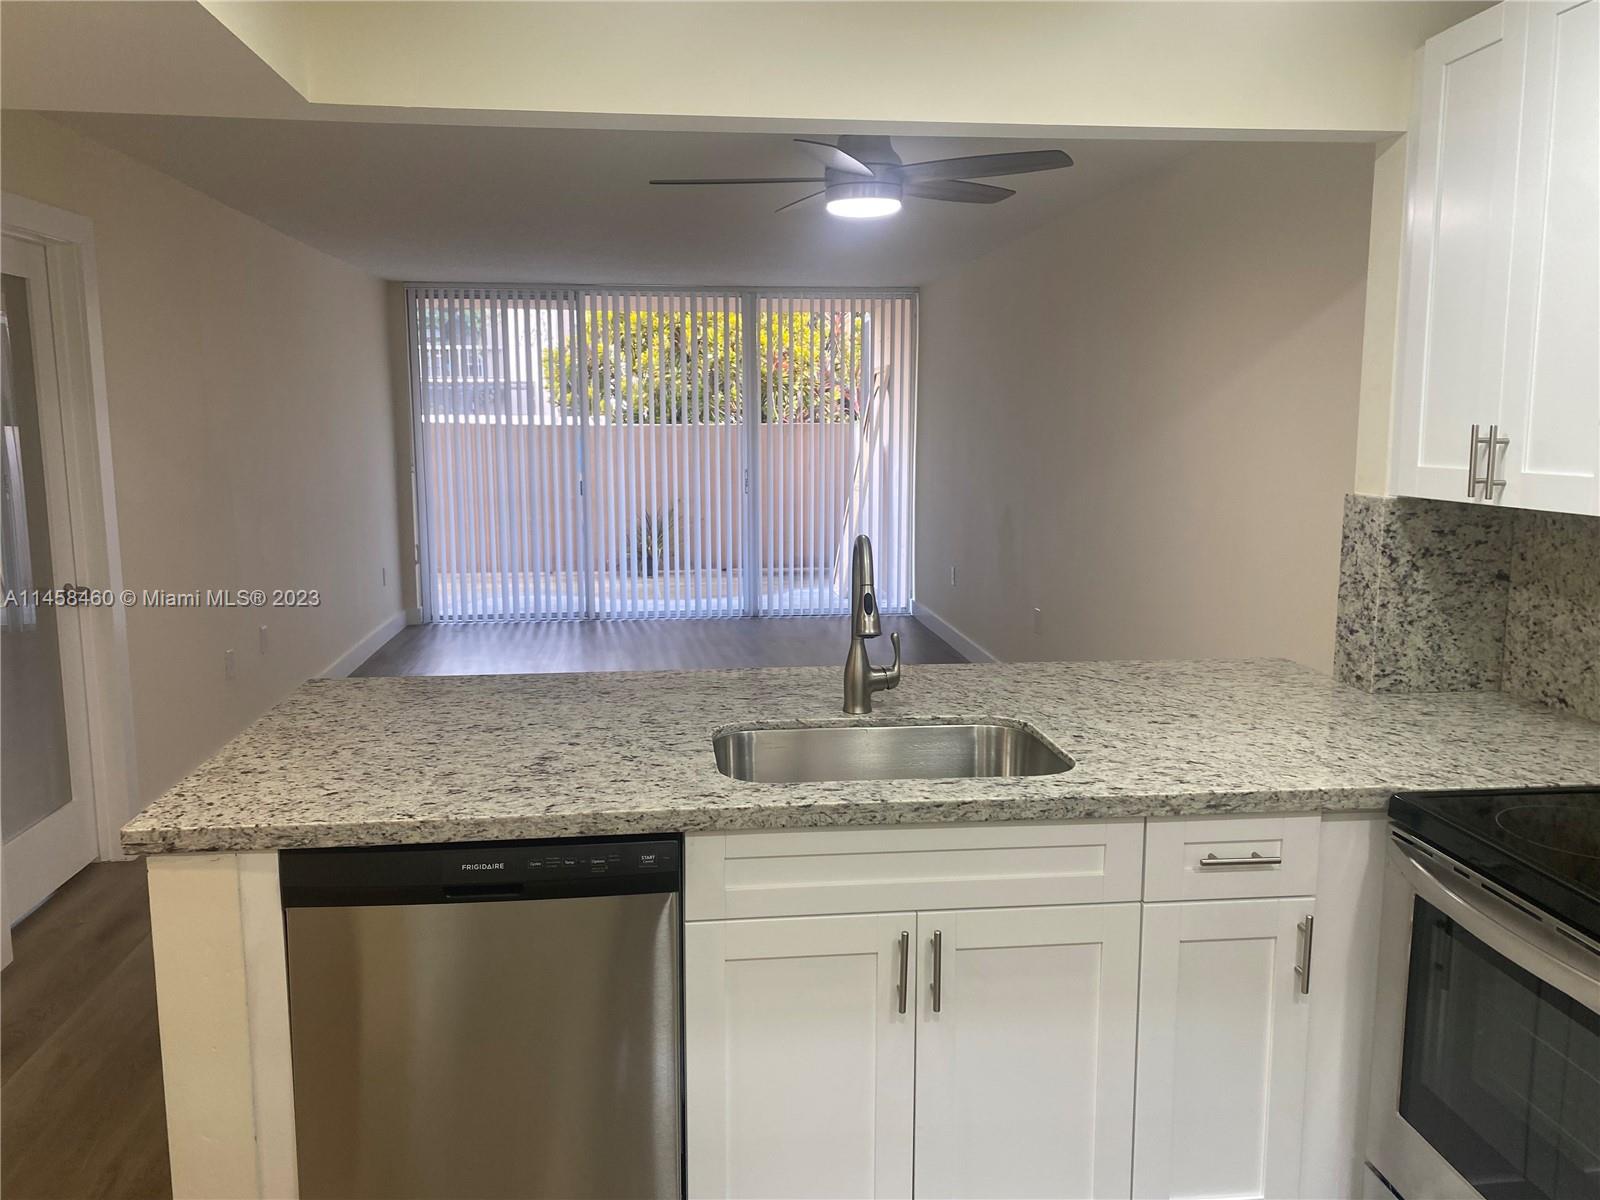 Completely renovated with no expense spared.  Enjoy all "Gardens" amenities, including swimming pool, tennis courts, clubhouse, security & more.  Landlord requires 1st month rent, 2 months security deposit & good credit.